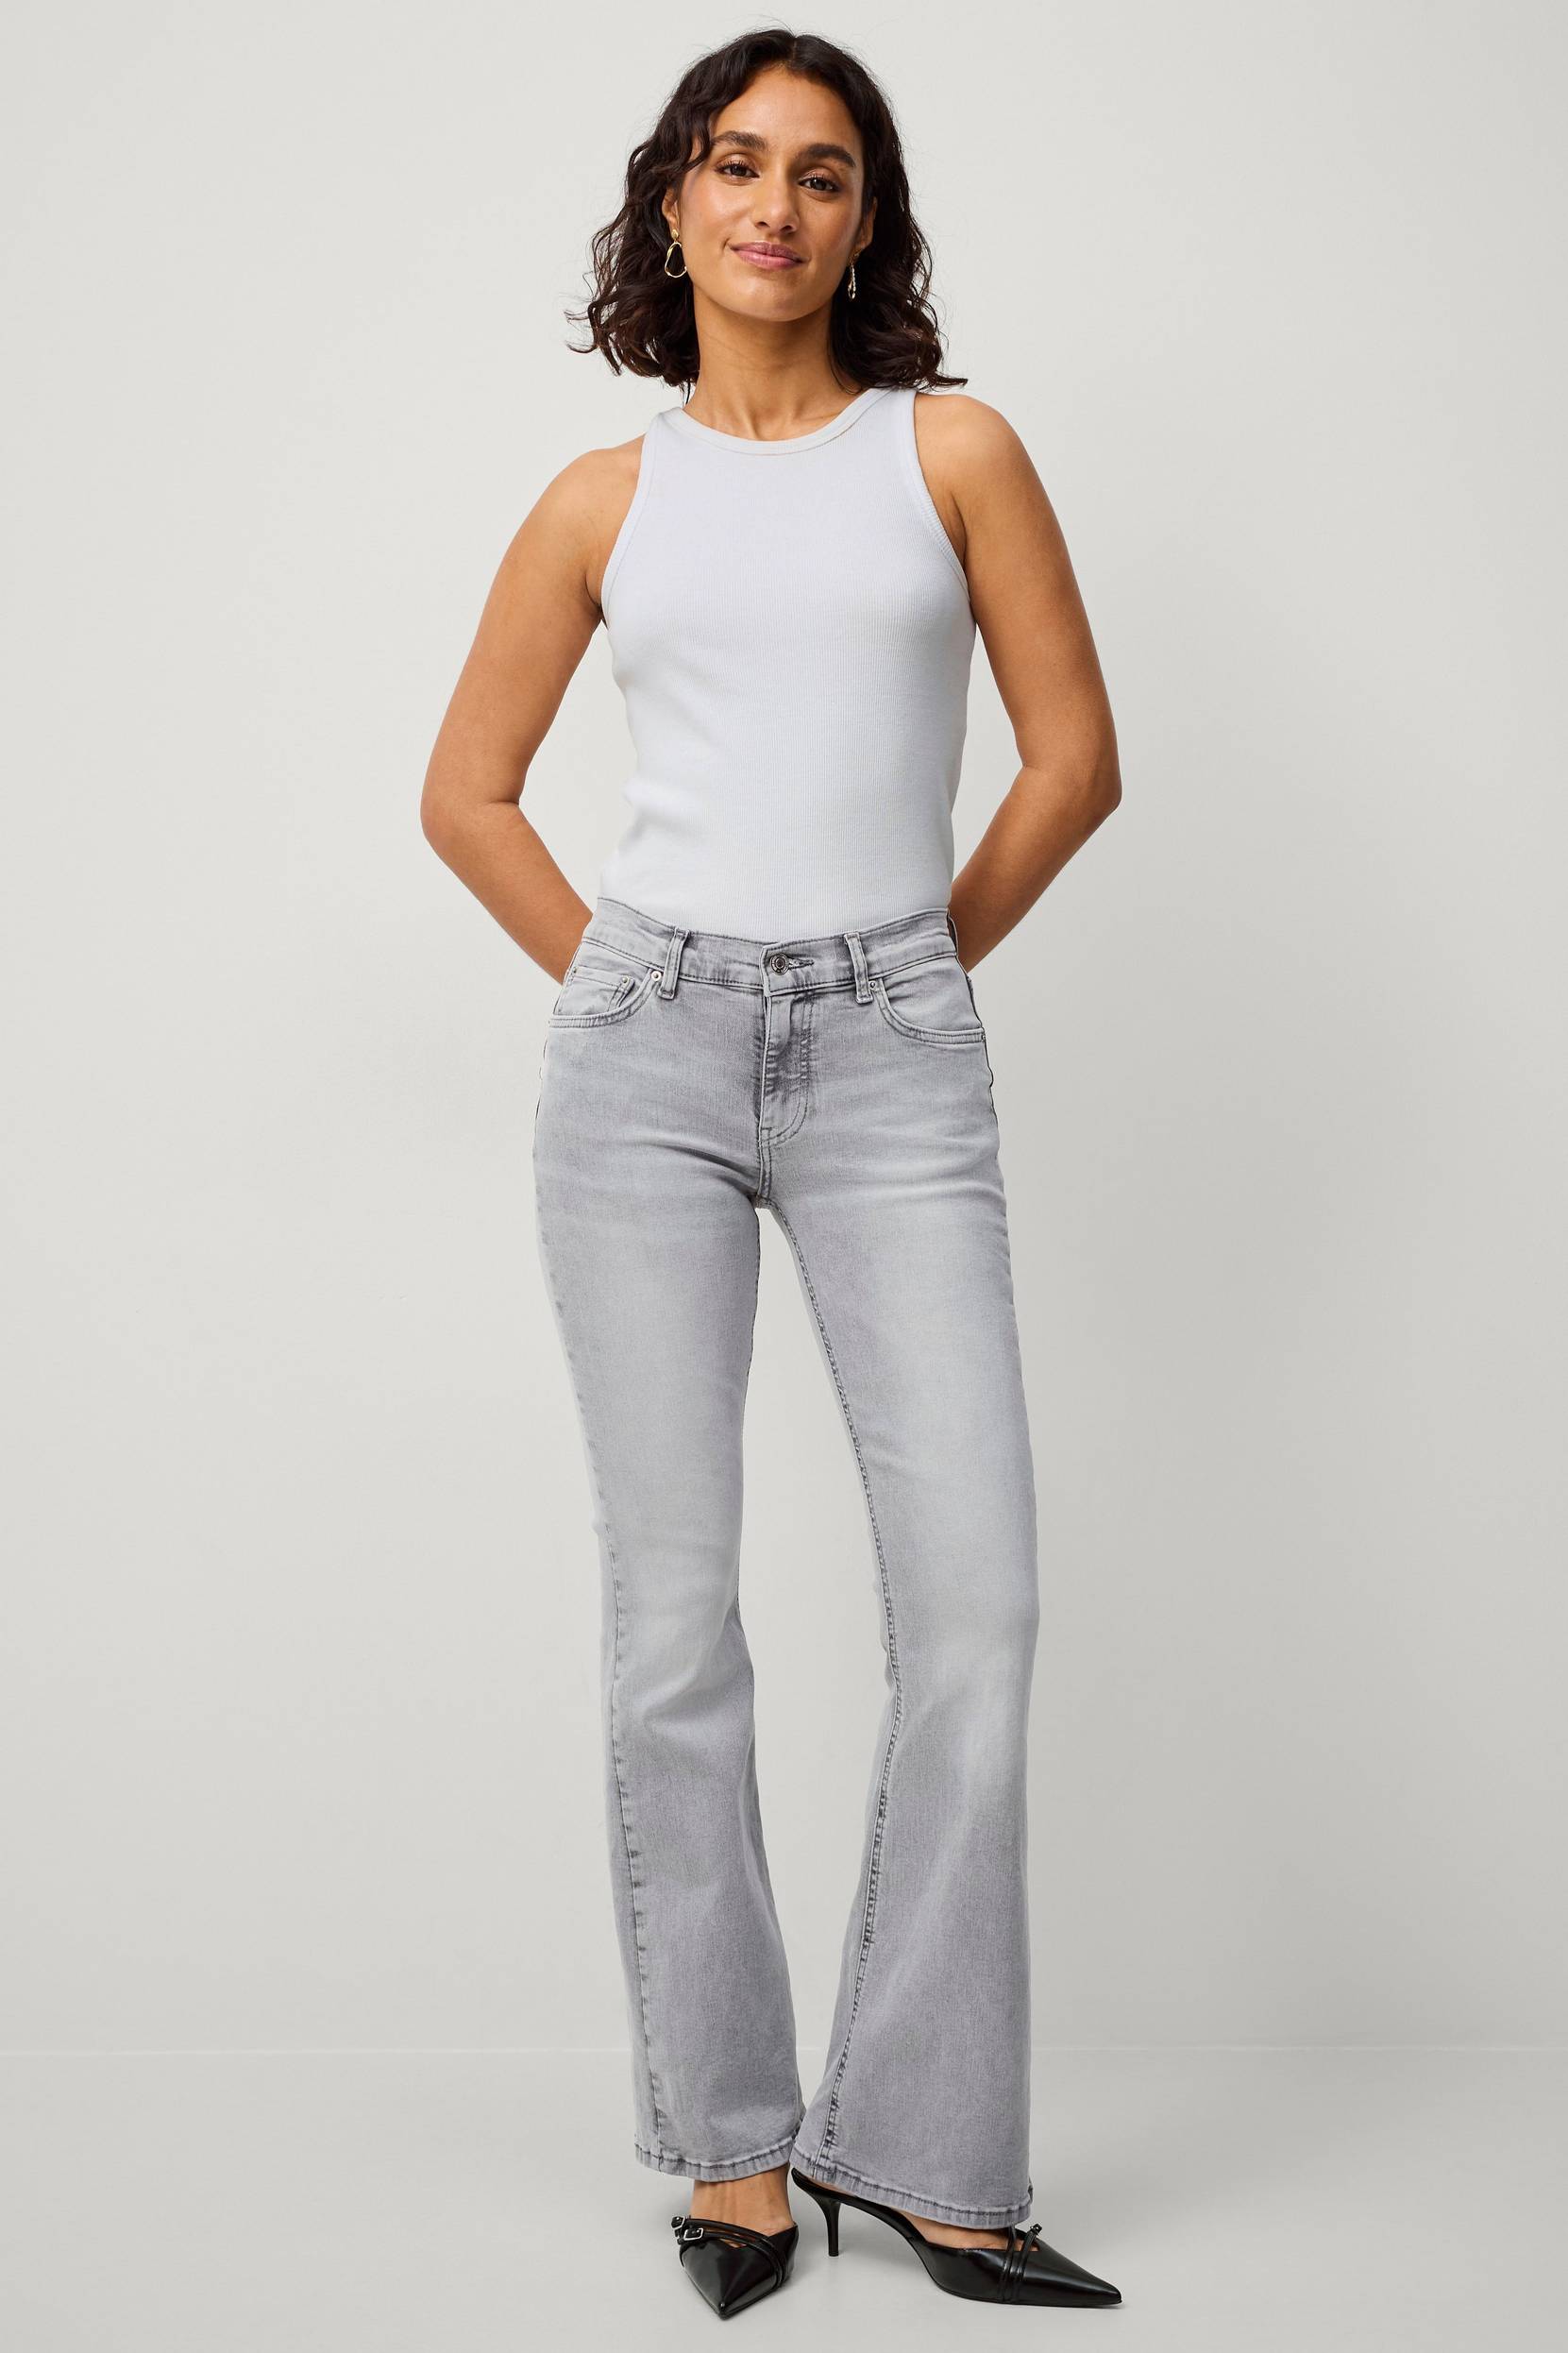 Gina Tricot - Jeans Low Waist Bootcut Jeans - Grå - 34